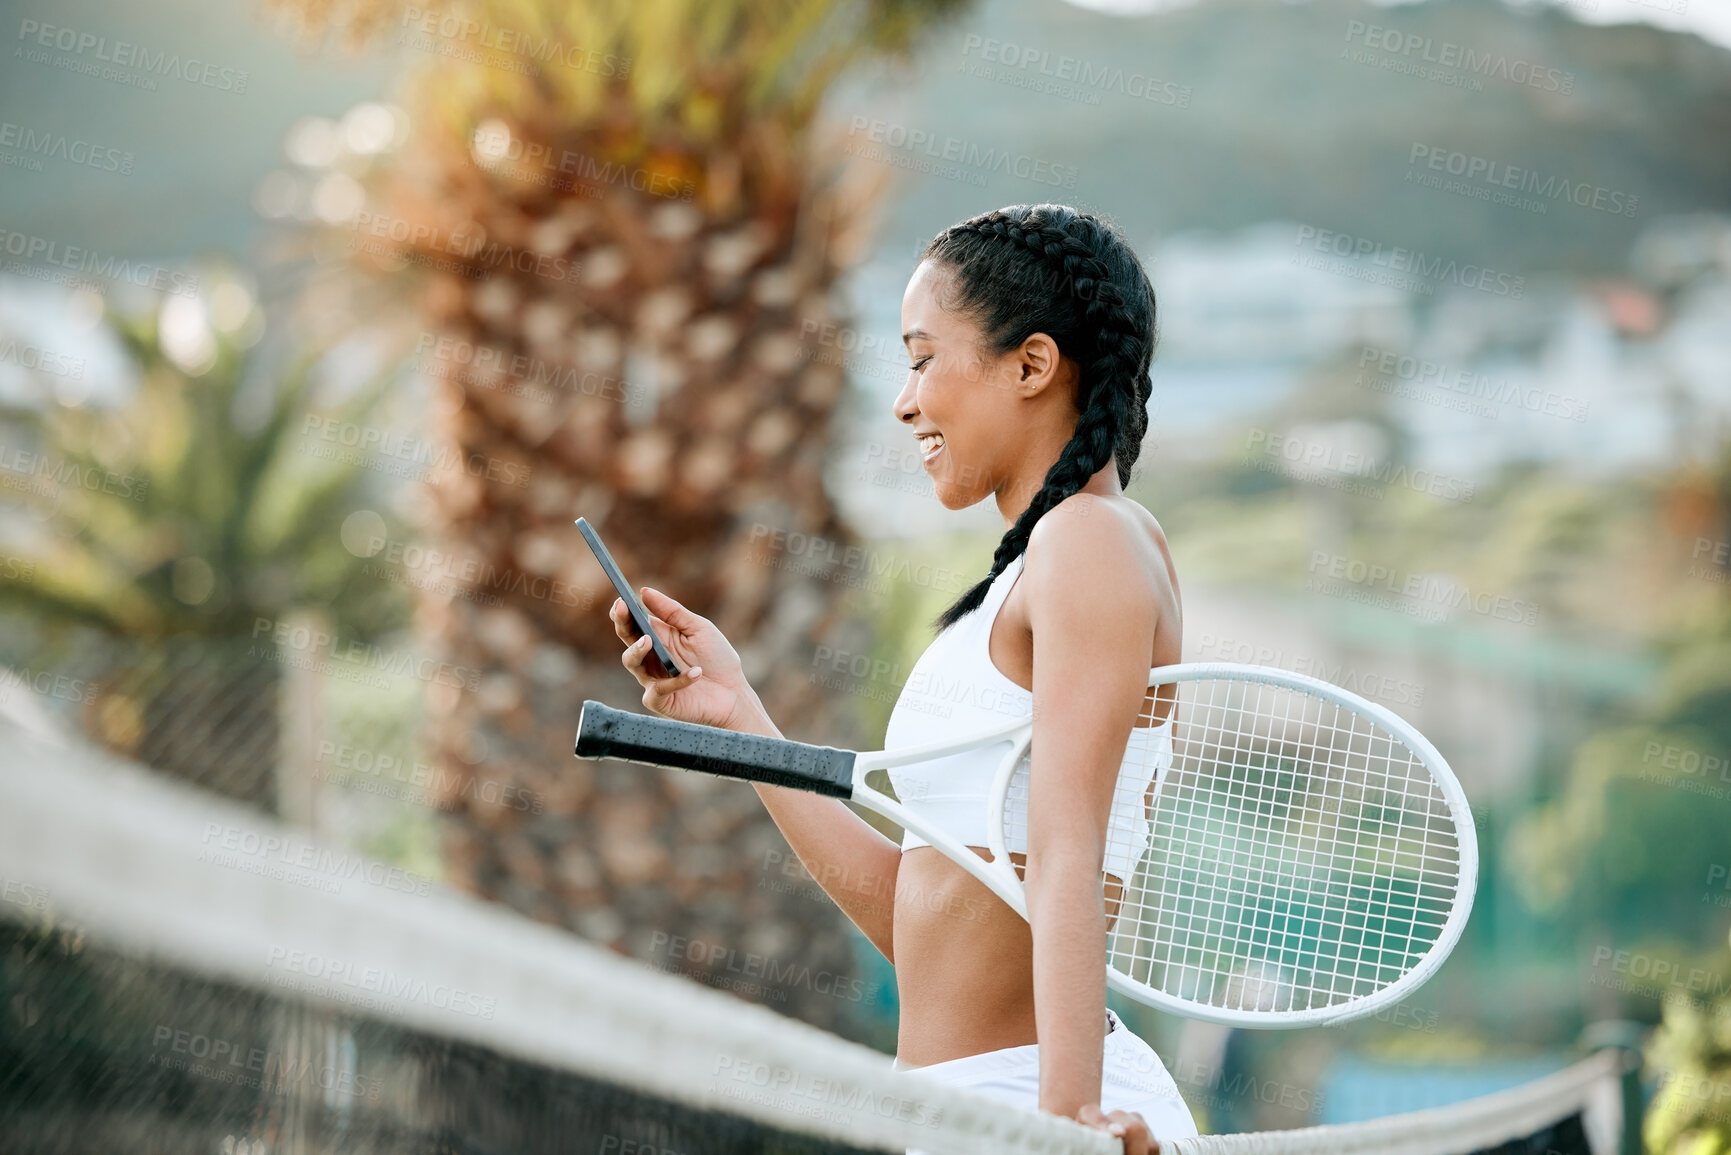 Buy stock photo Shot of a sporty young woman using a cellphone while playing tennis on a court